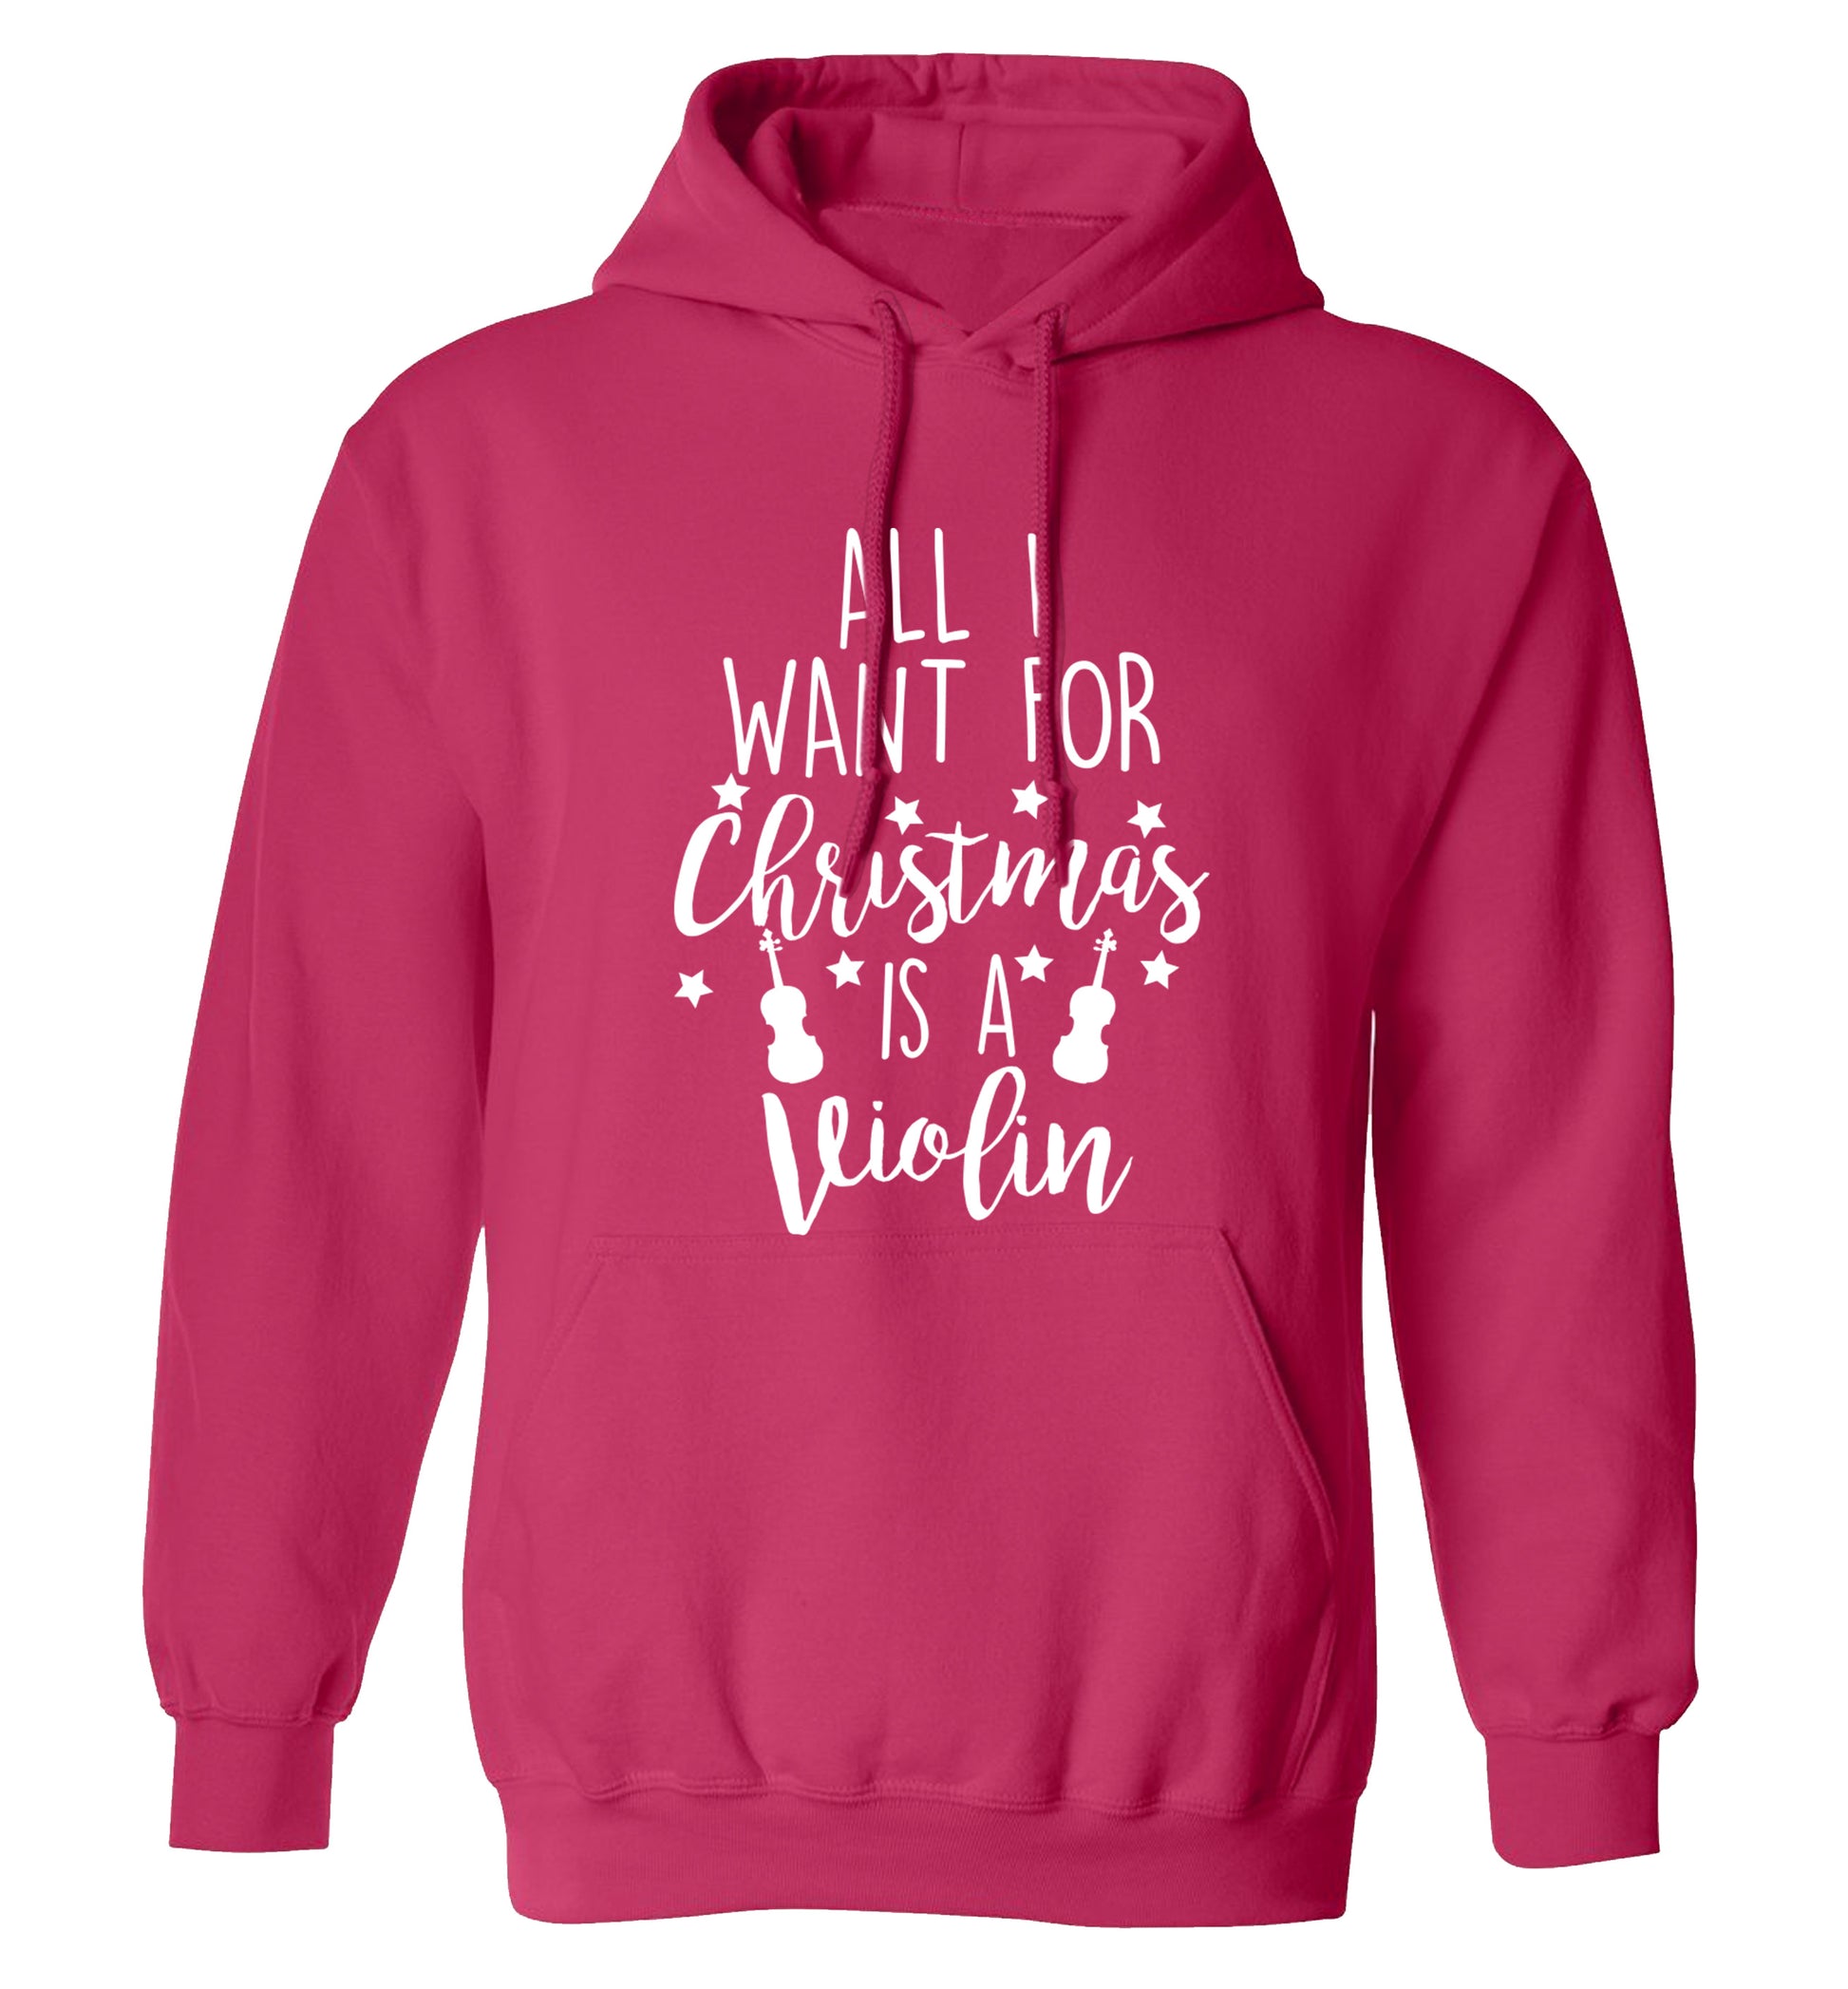 All I Want For Christmas is a Violin adults unisex pink hoodie 2XL